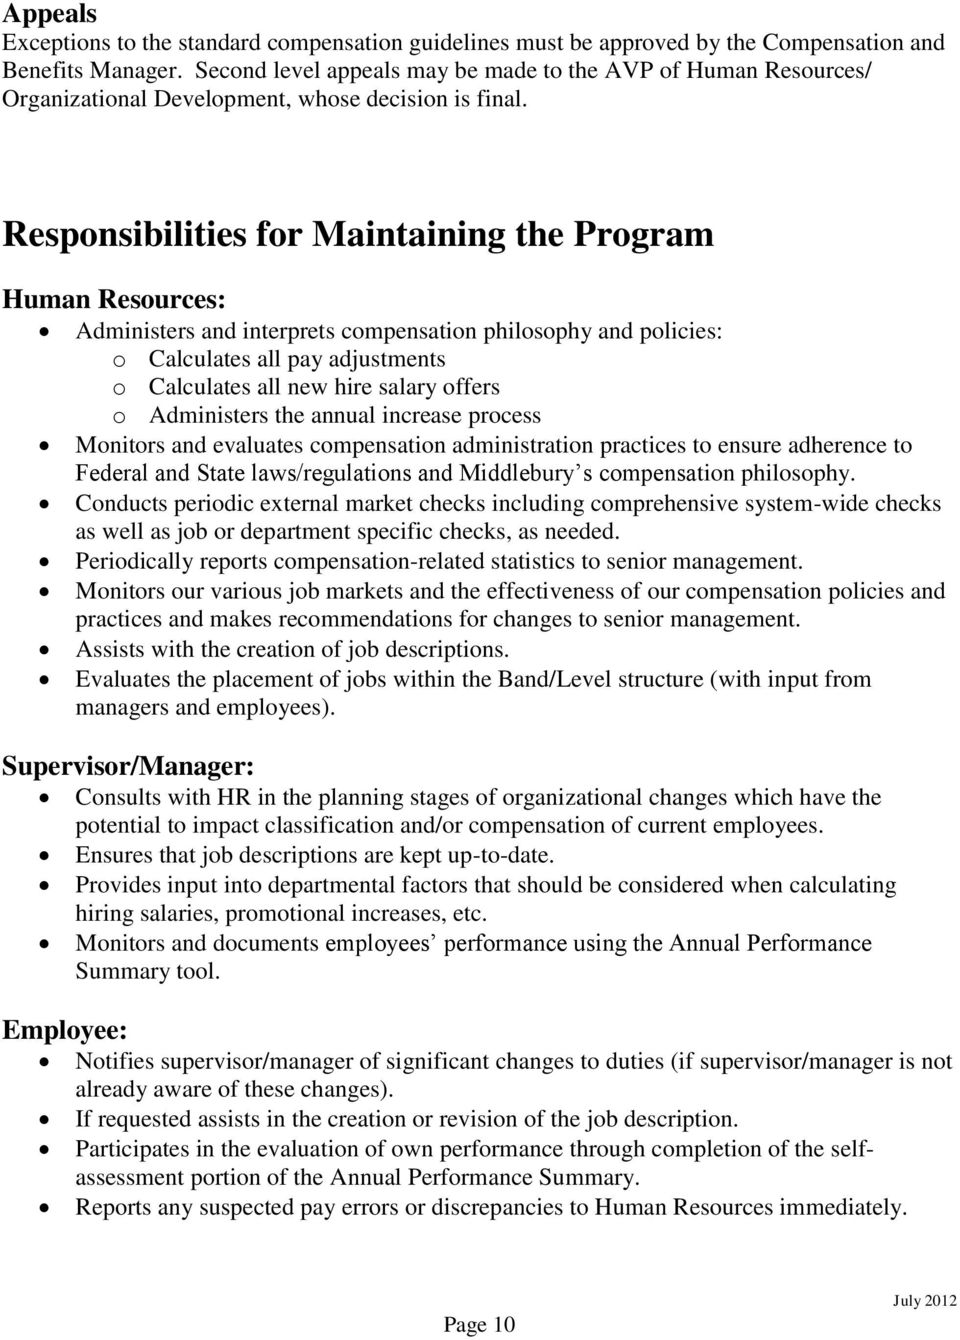 Responsibilities for Maintaining the Program Human Resources: Administers and interprets compensation philosophy and policies: o Calculates all pay adjustments o Calculates all new hire salary offers